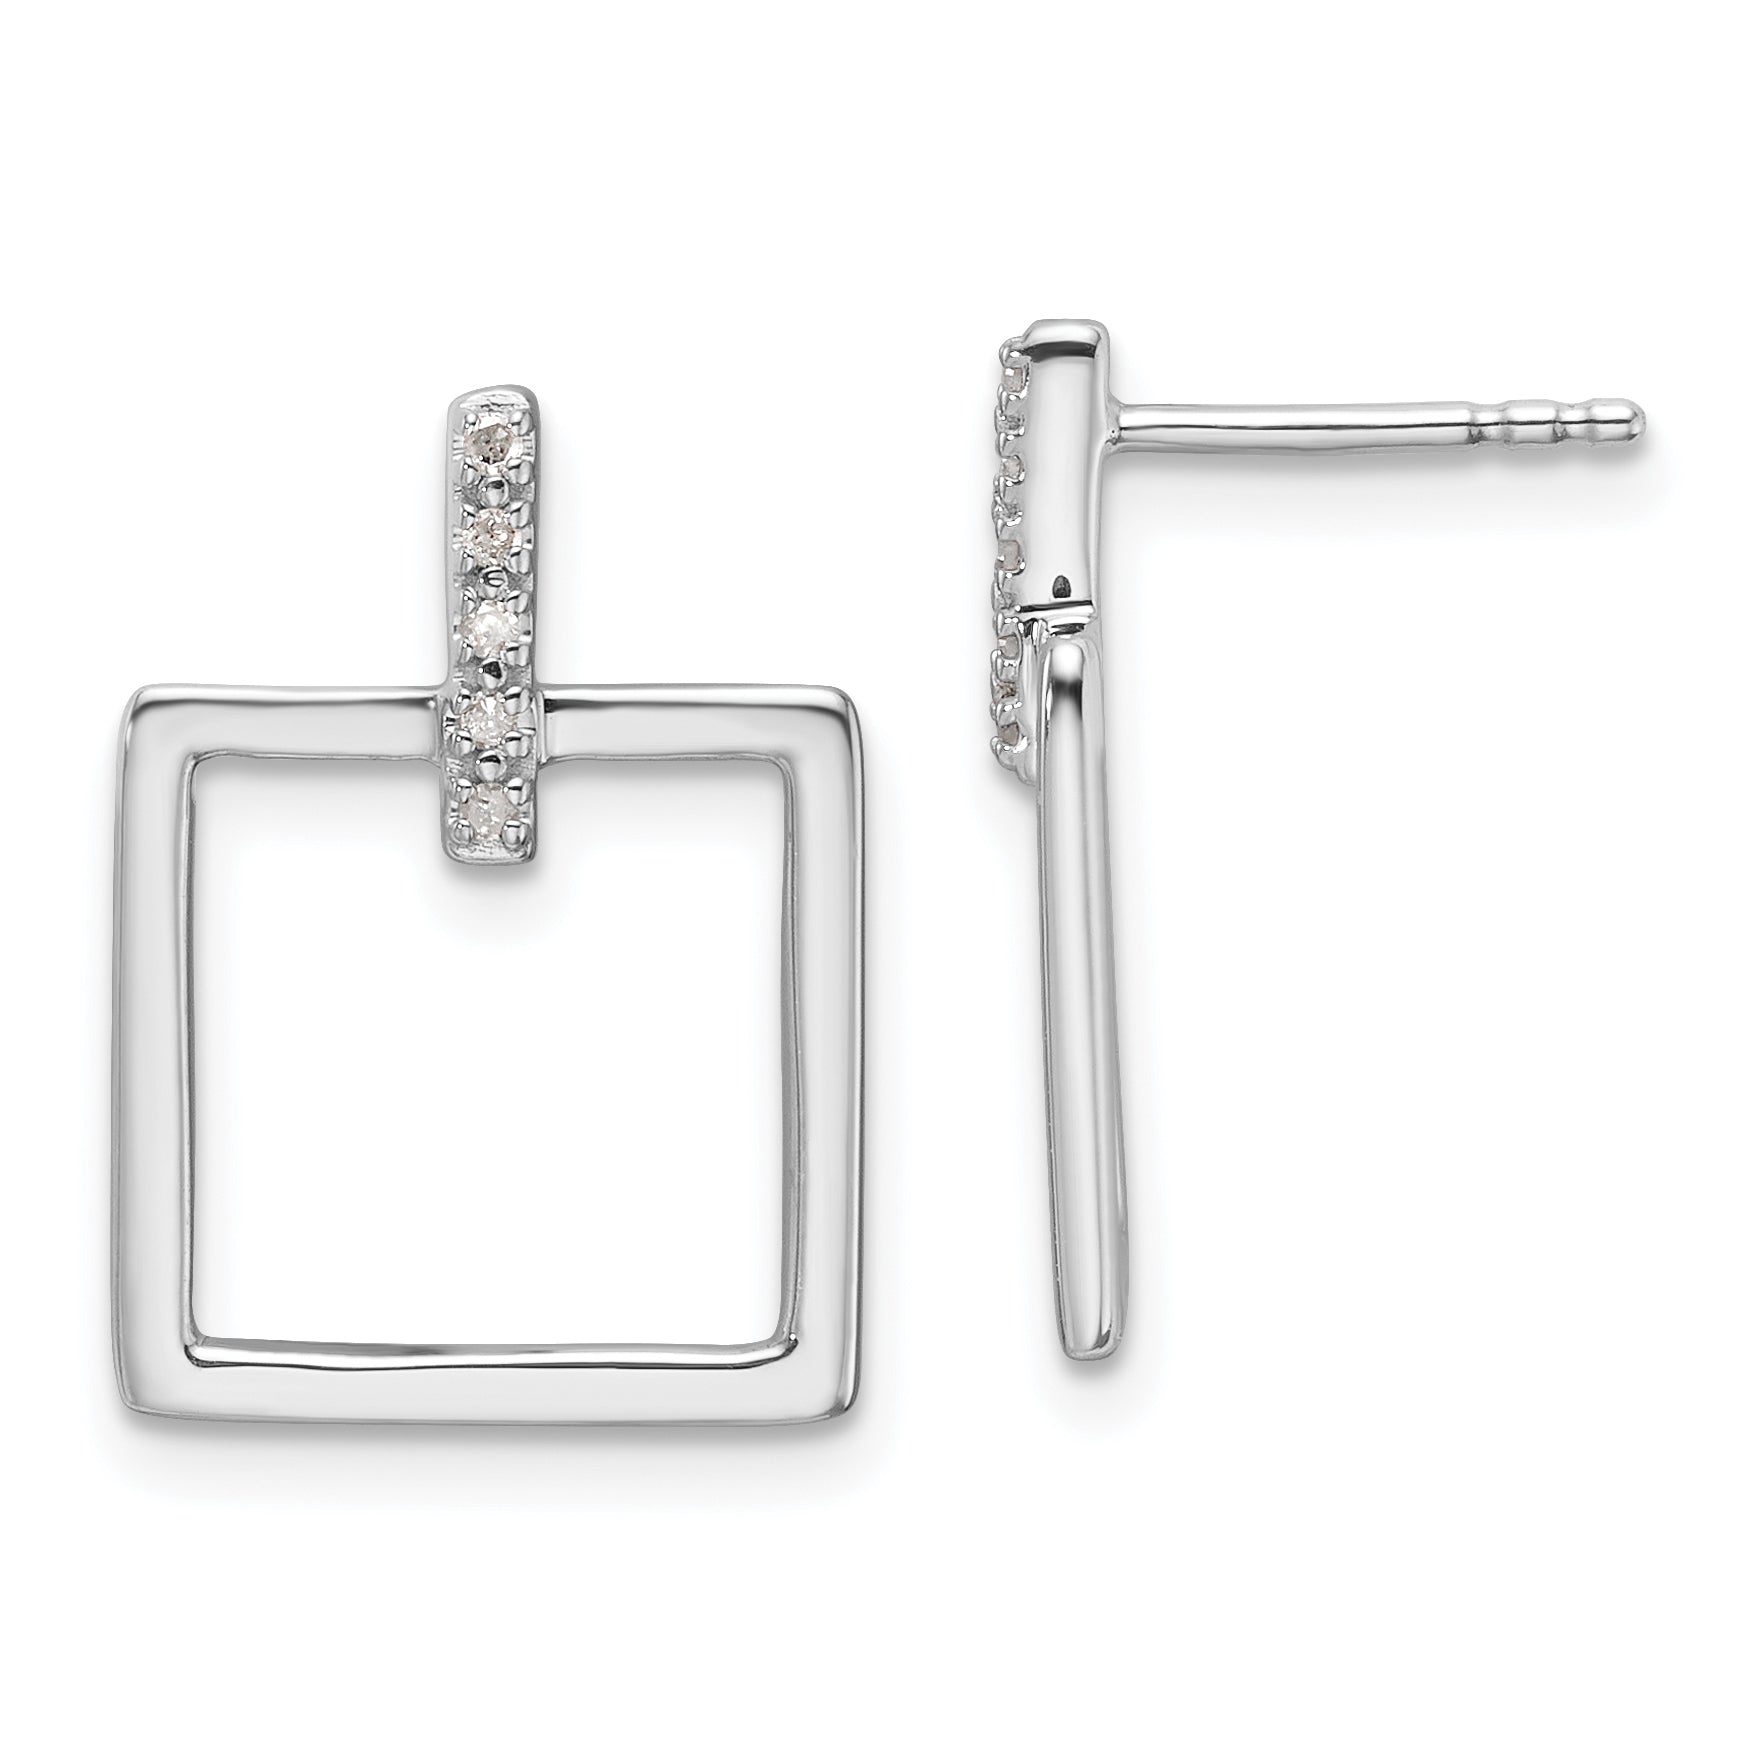 Sterling Silver RH Plated White Ice .05ct. Dia. Square Post Dangle Earrings